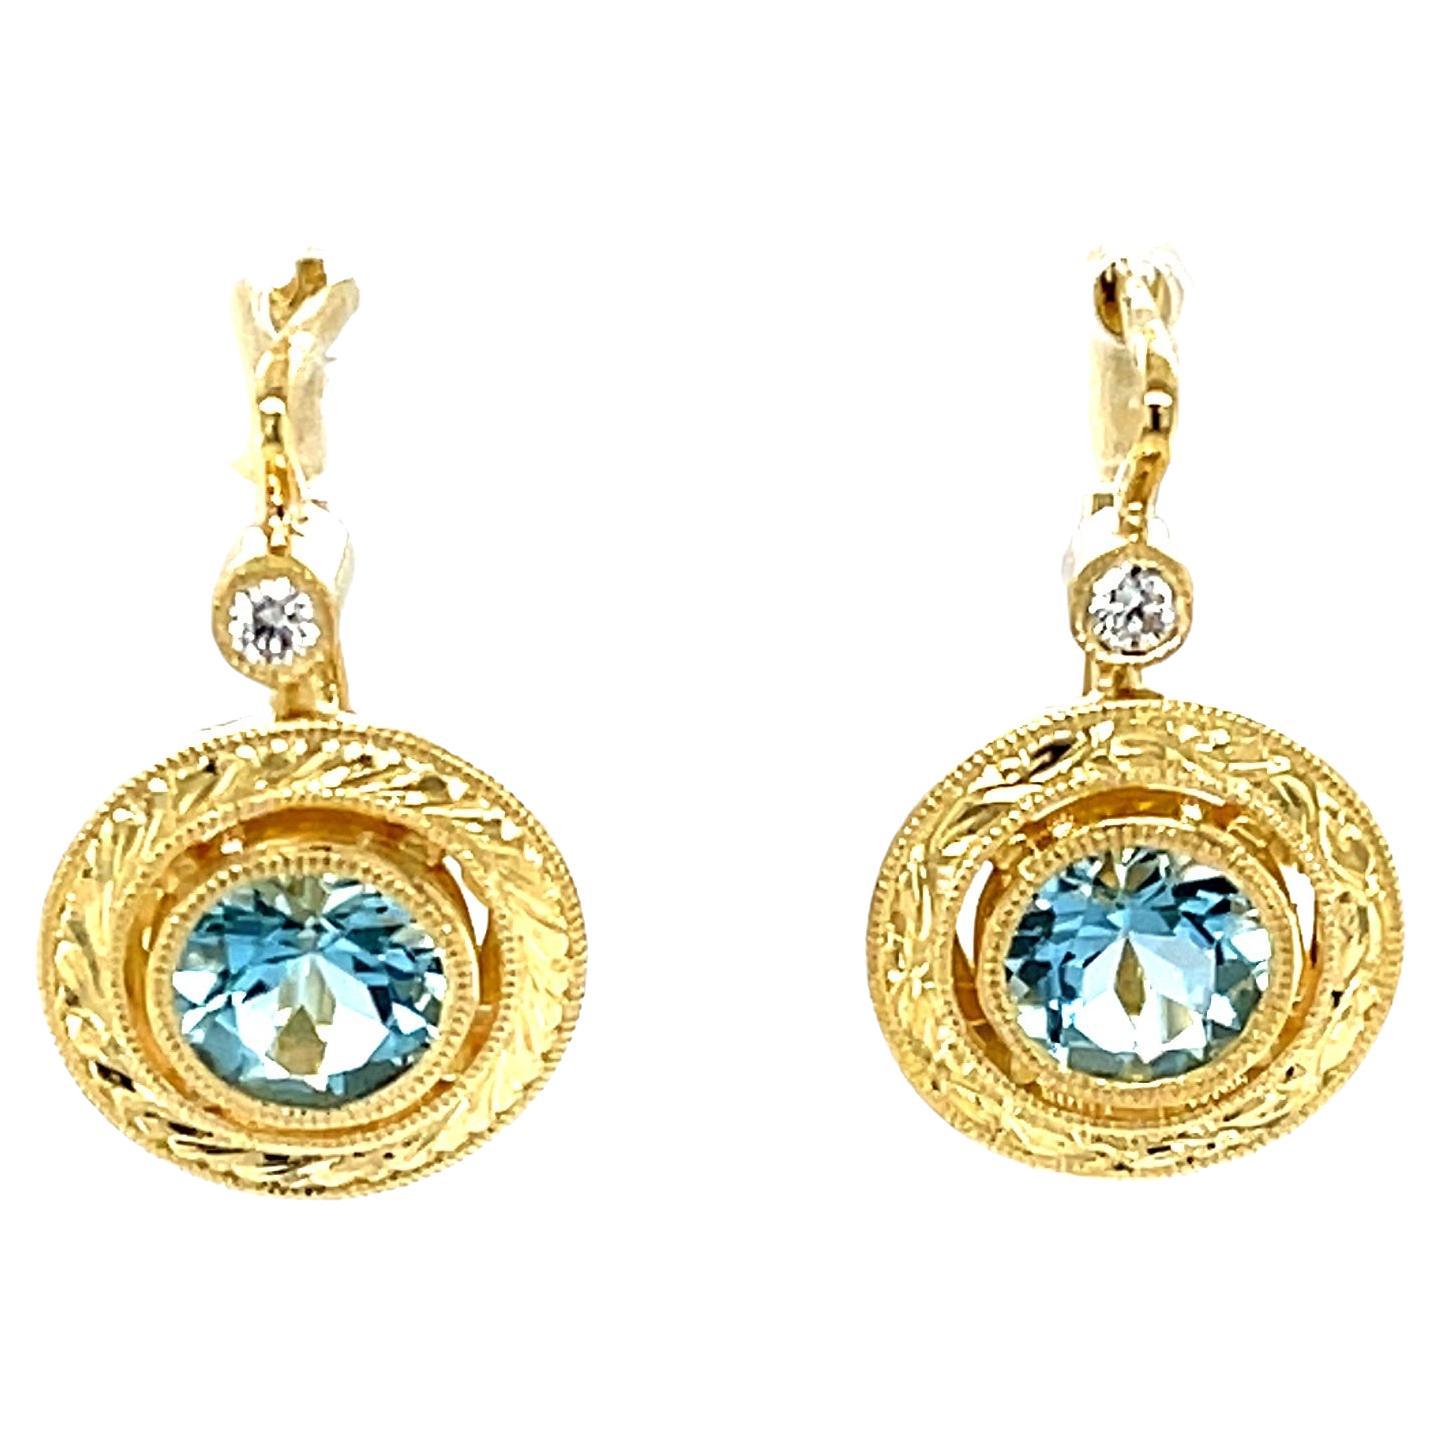 These aquamarine and diamond drop earrings are such a 